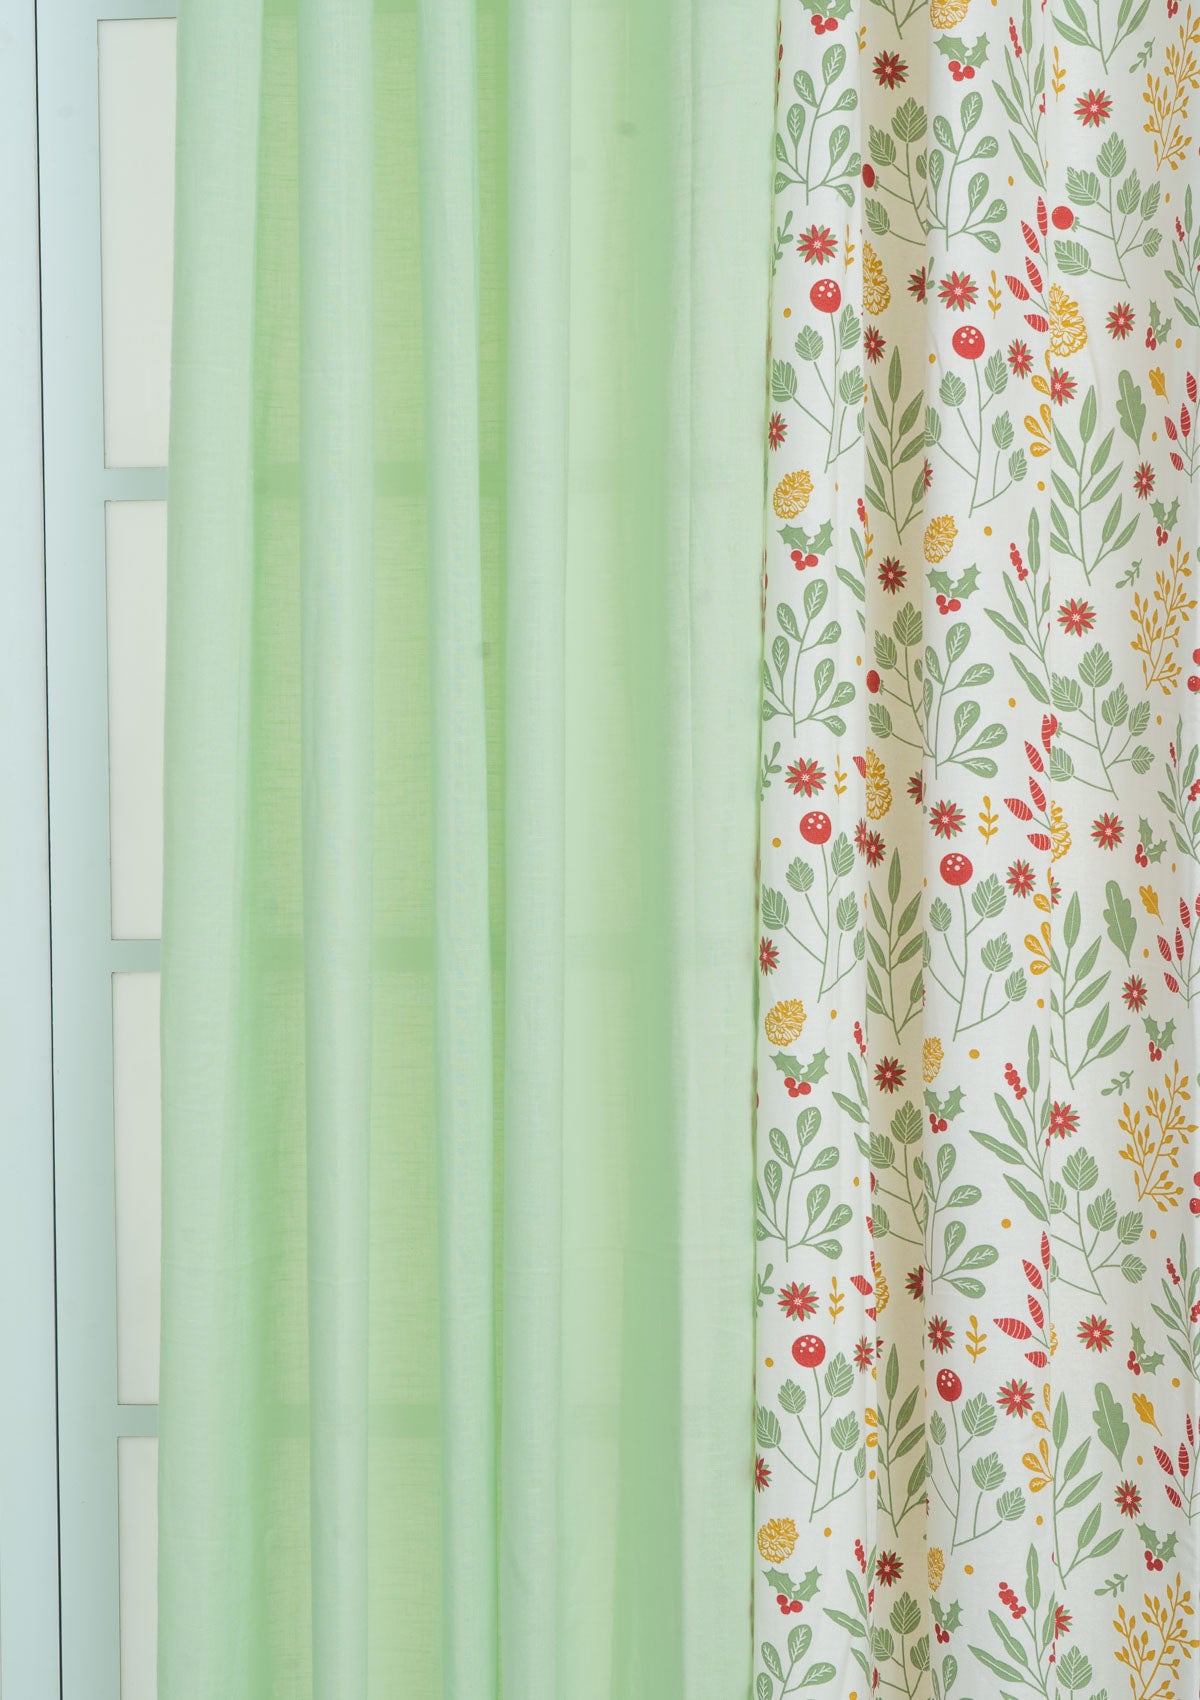 Forraged berries with solid sage green sheer - Multicolor